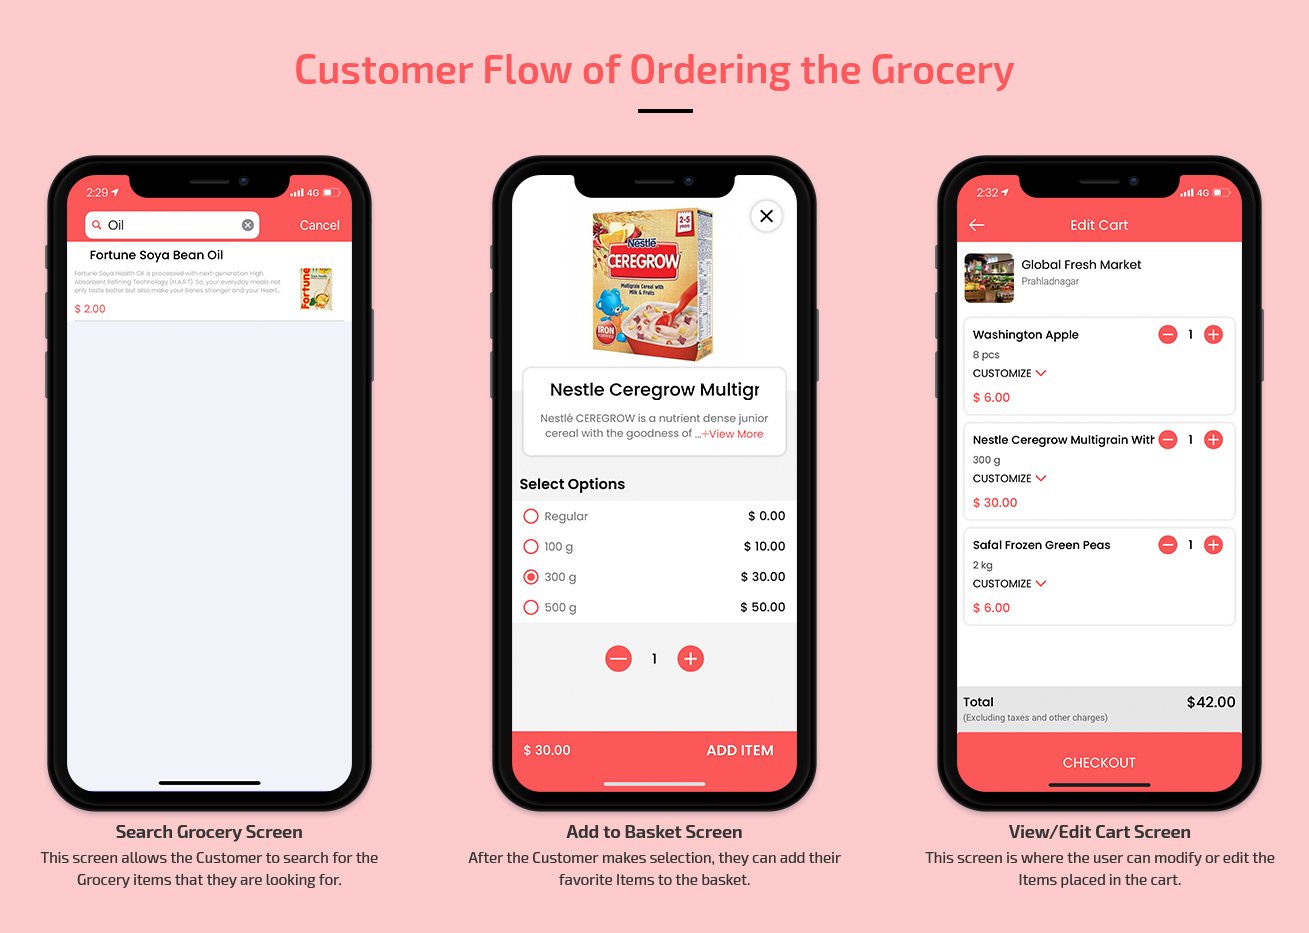 user search food items